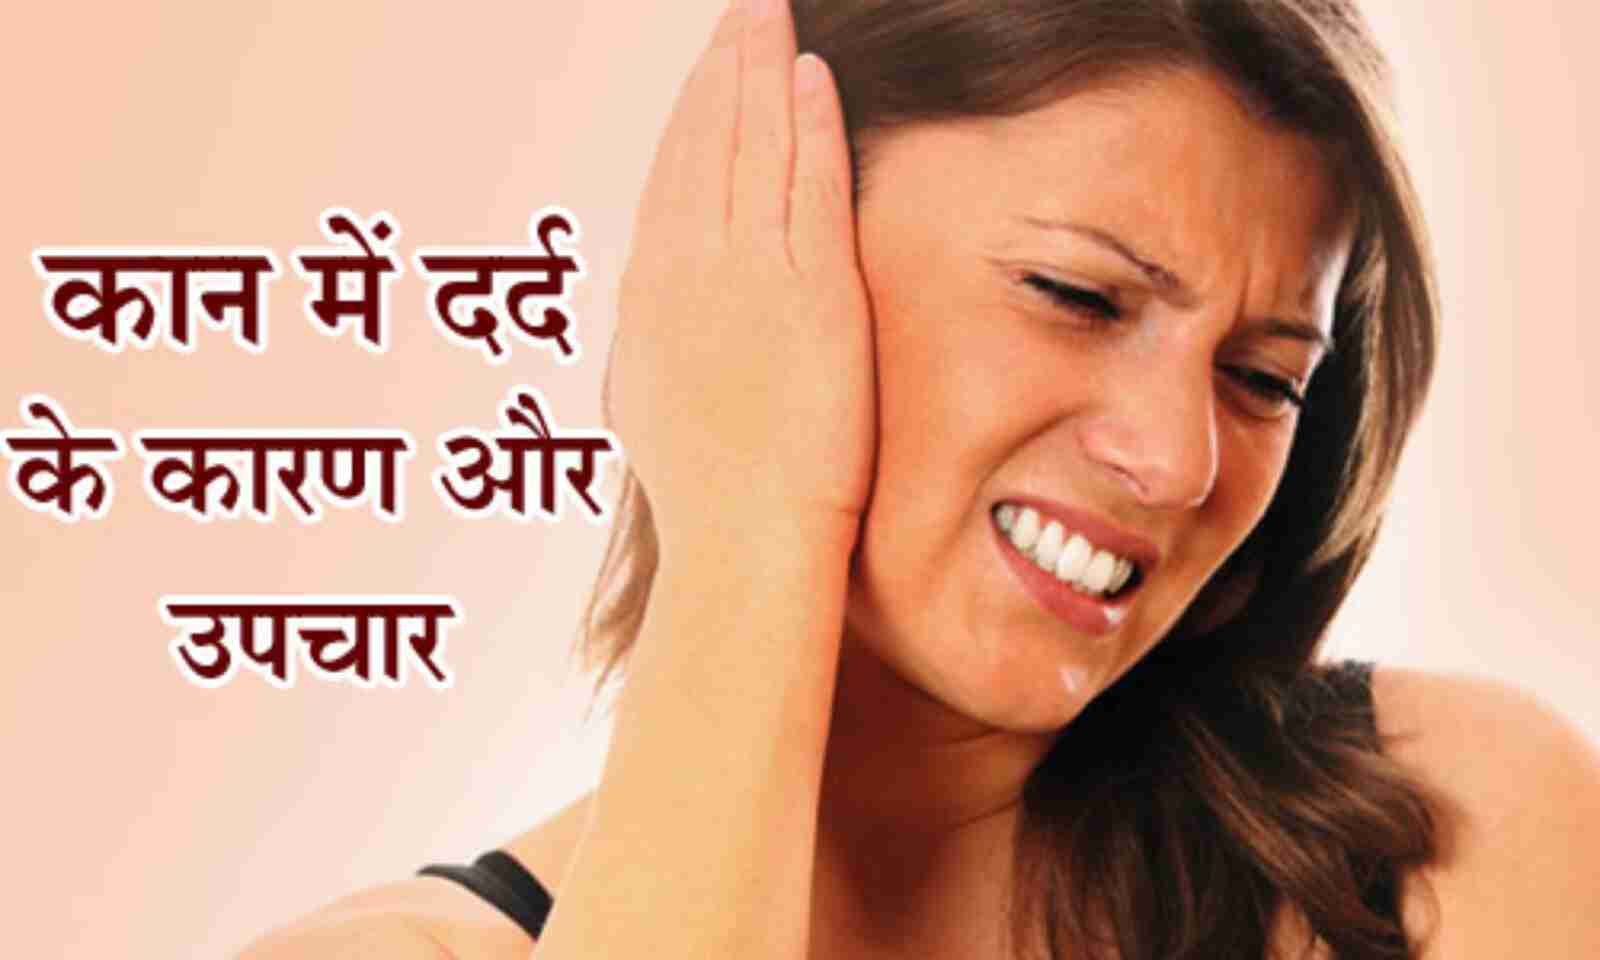 Causes of ear pain, infection, bacterial ear pain, know the symptoms and save it soon